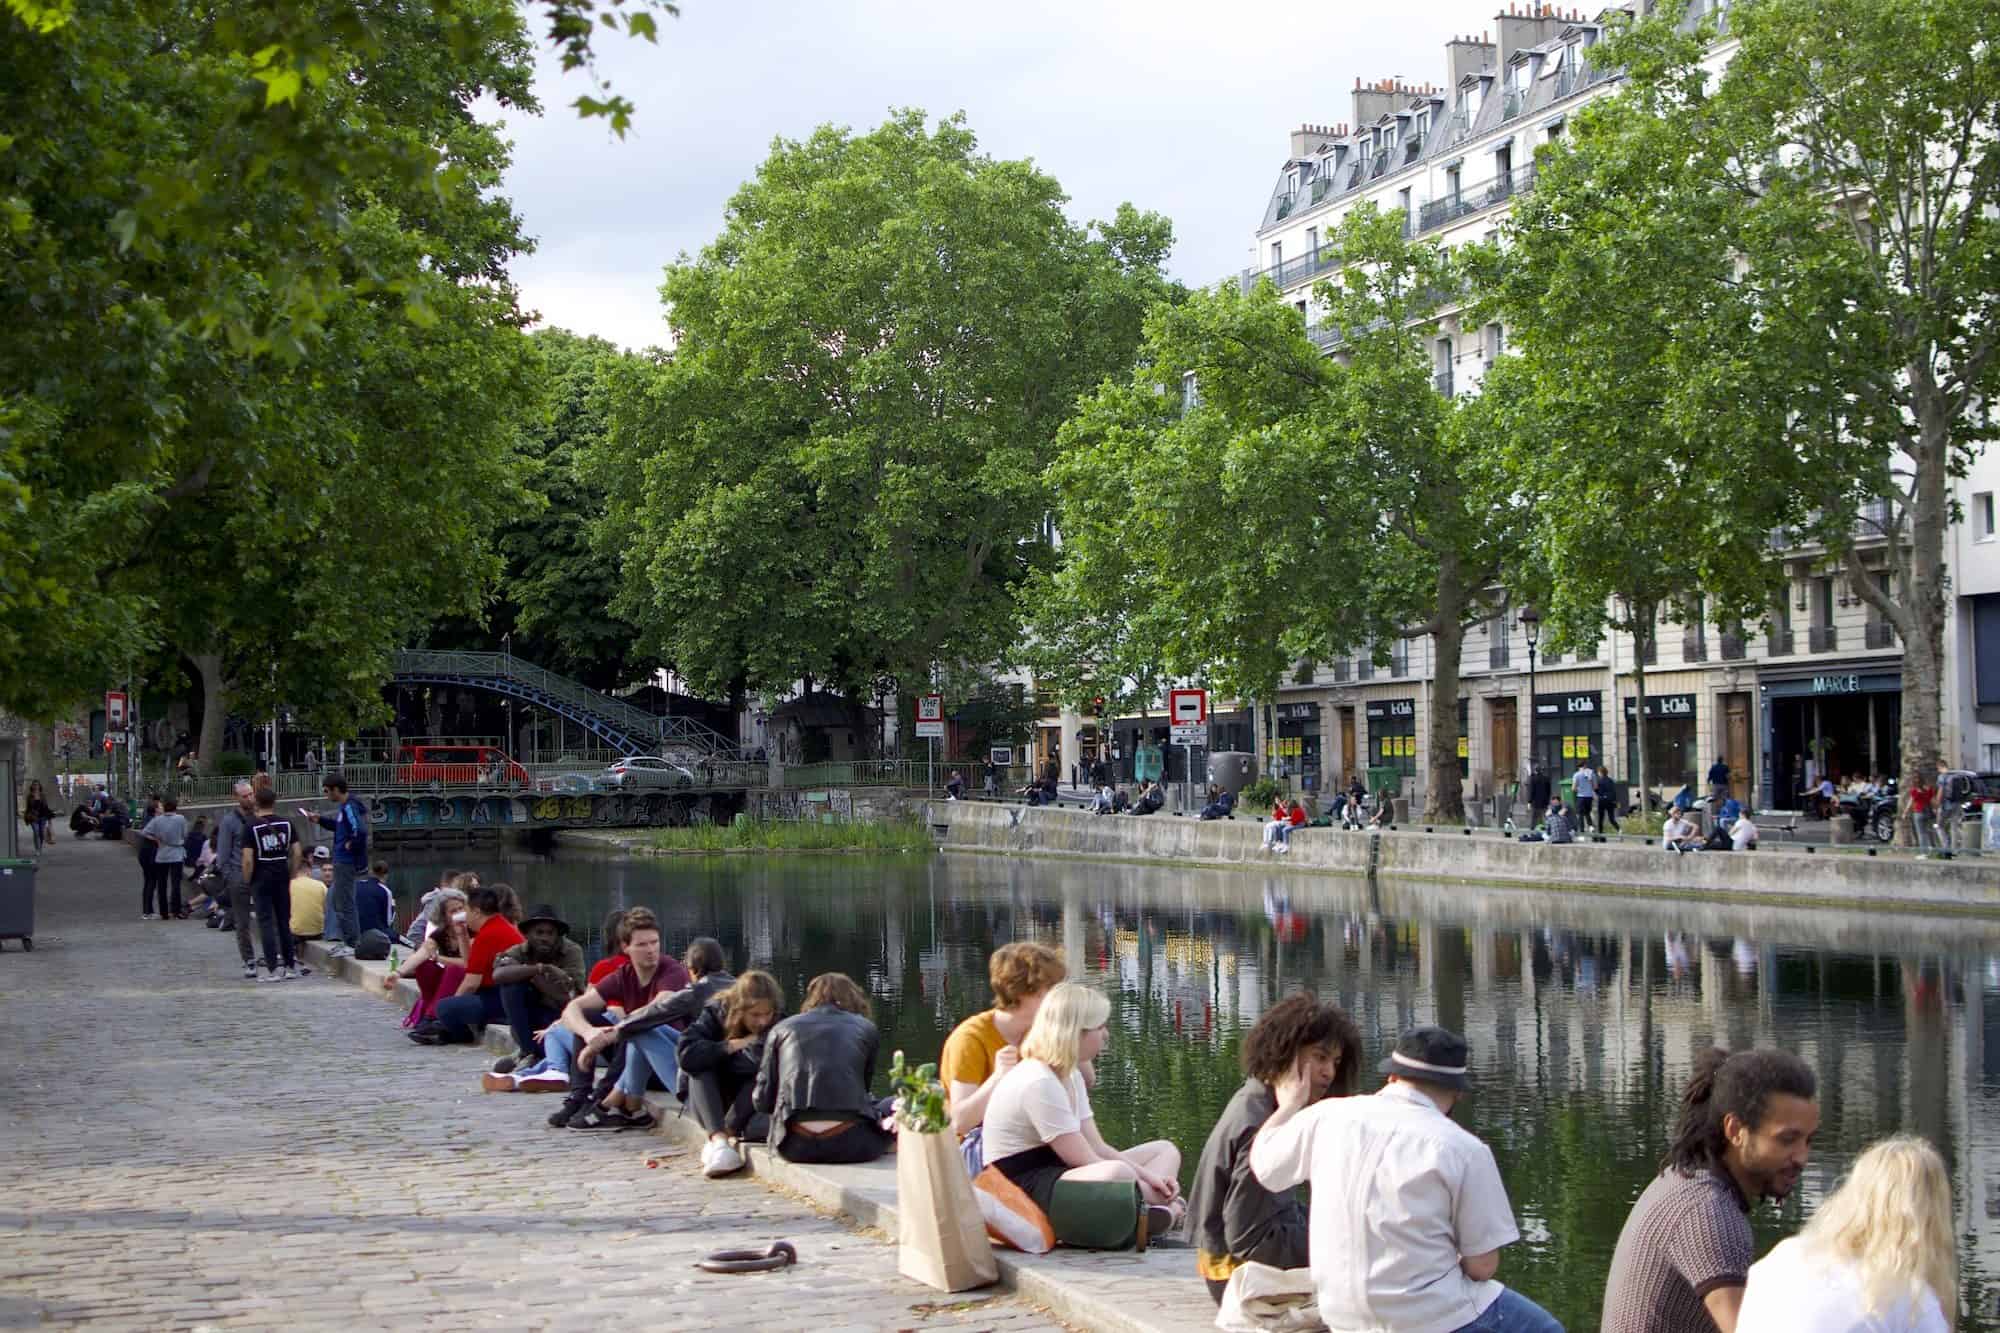 Locals love to come and relax by the water on the banks of the Canal Saint Martin in Paris.